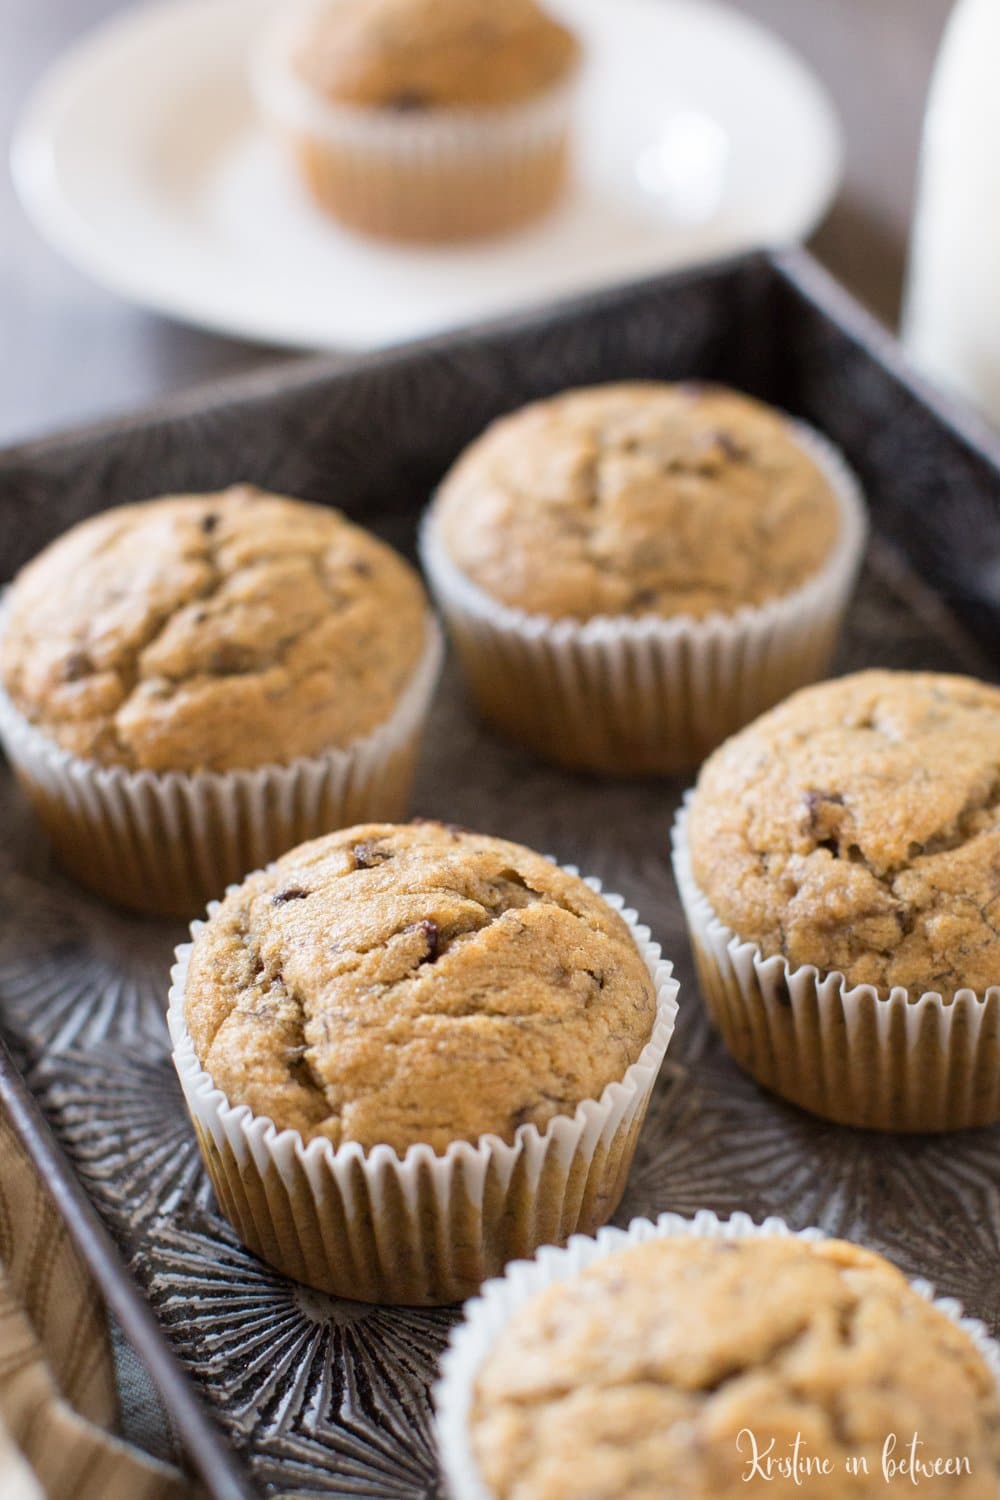 These whole wheat peanut butter banana muffins are the perfect breakfast or snack!